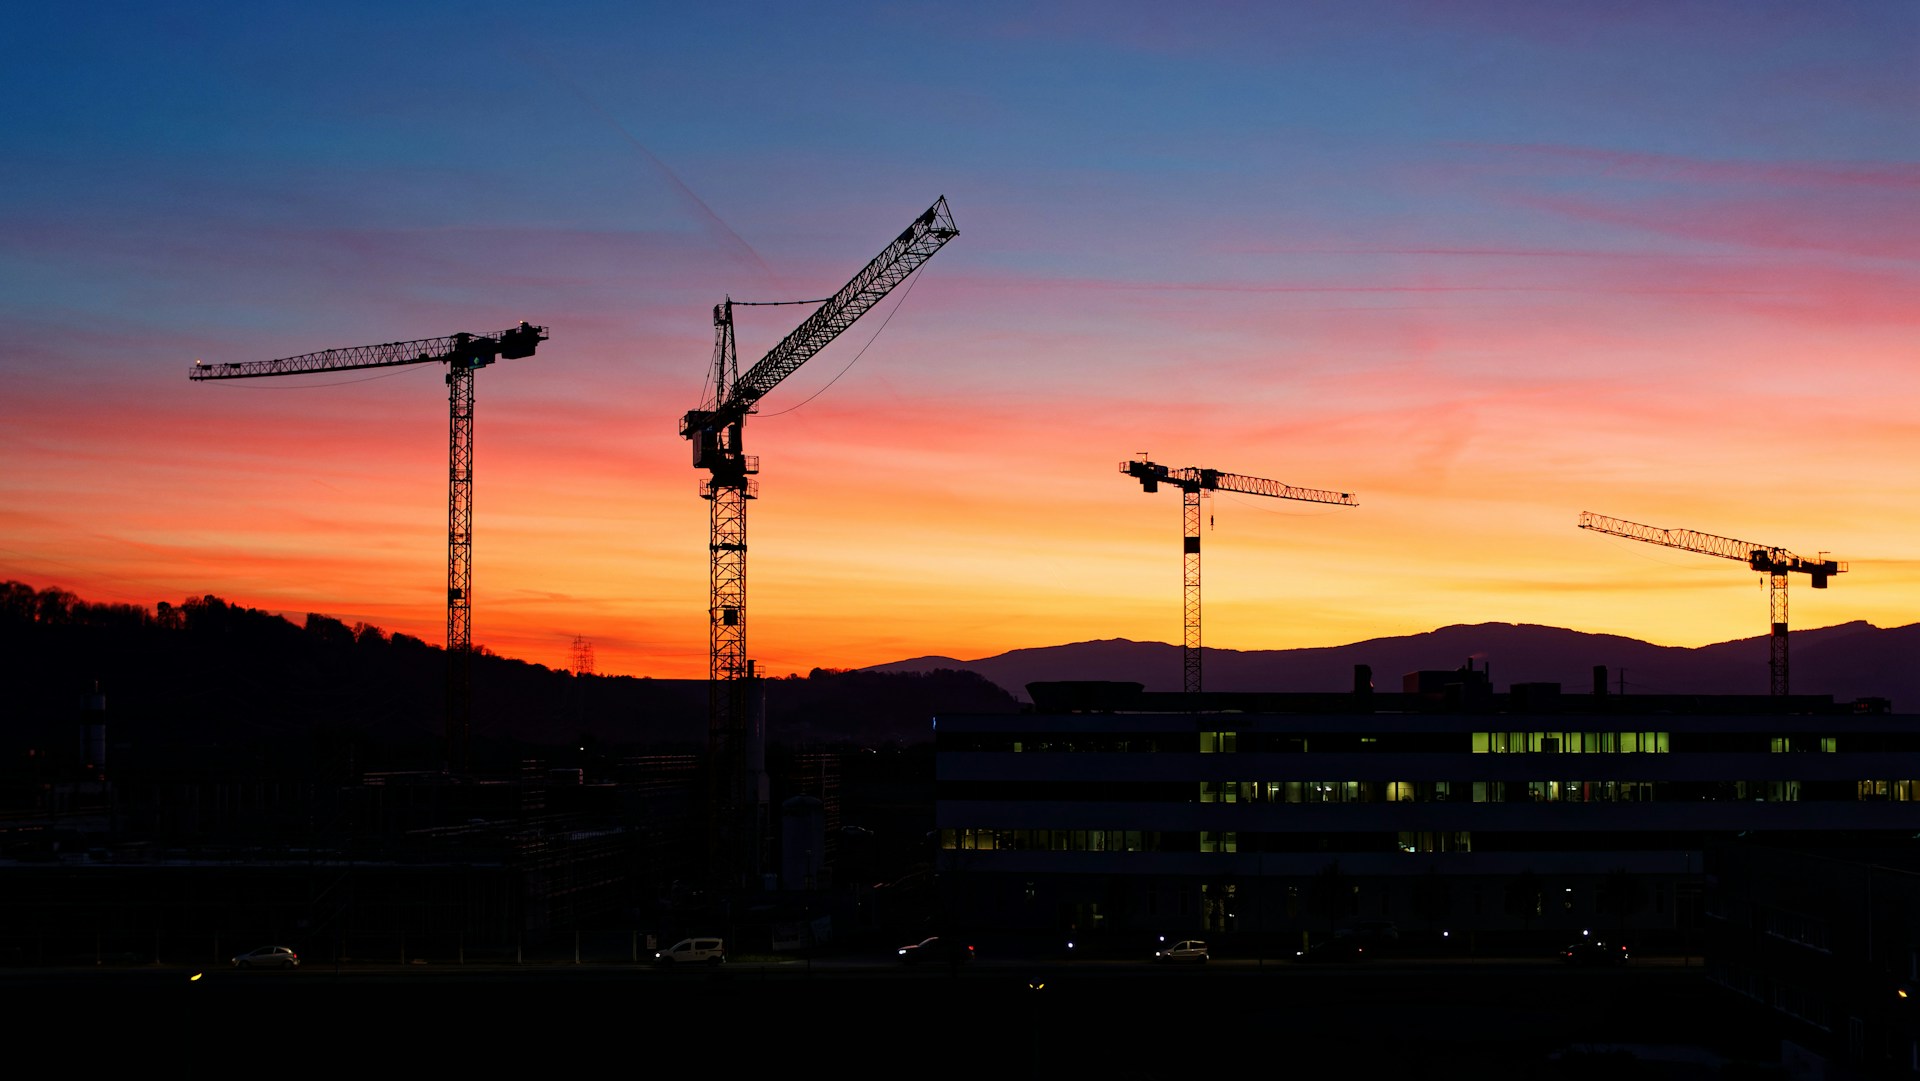 a group of cranes are silhouetted against a sunset